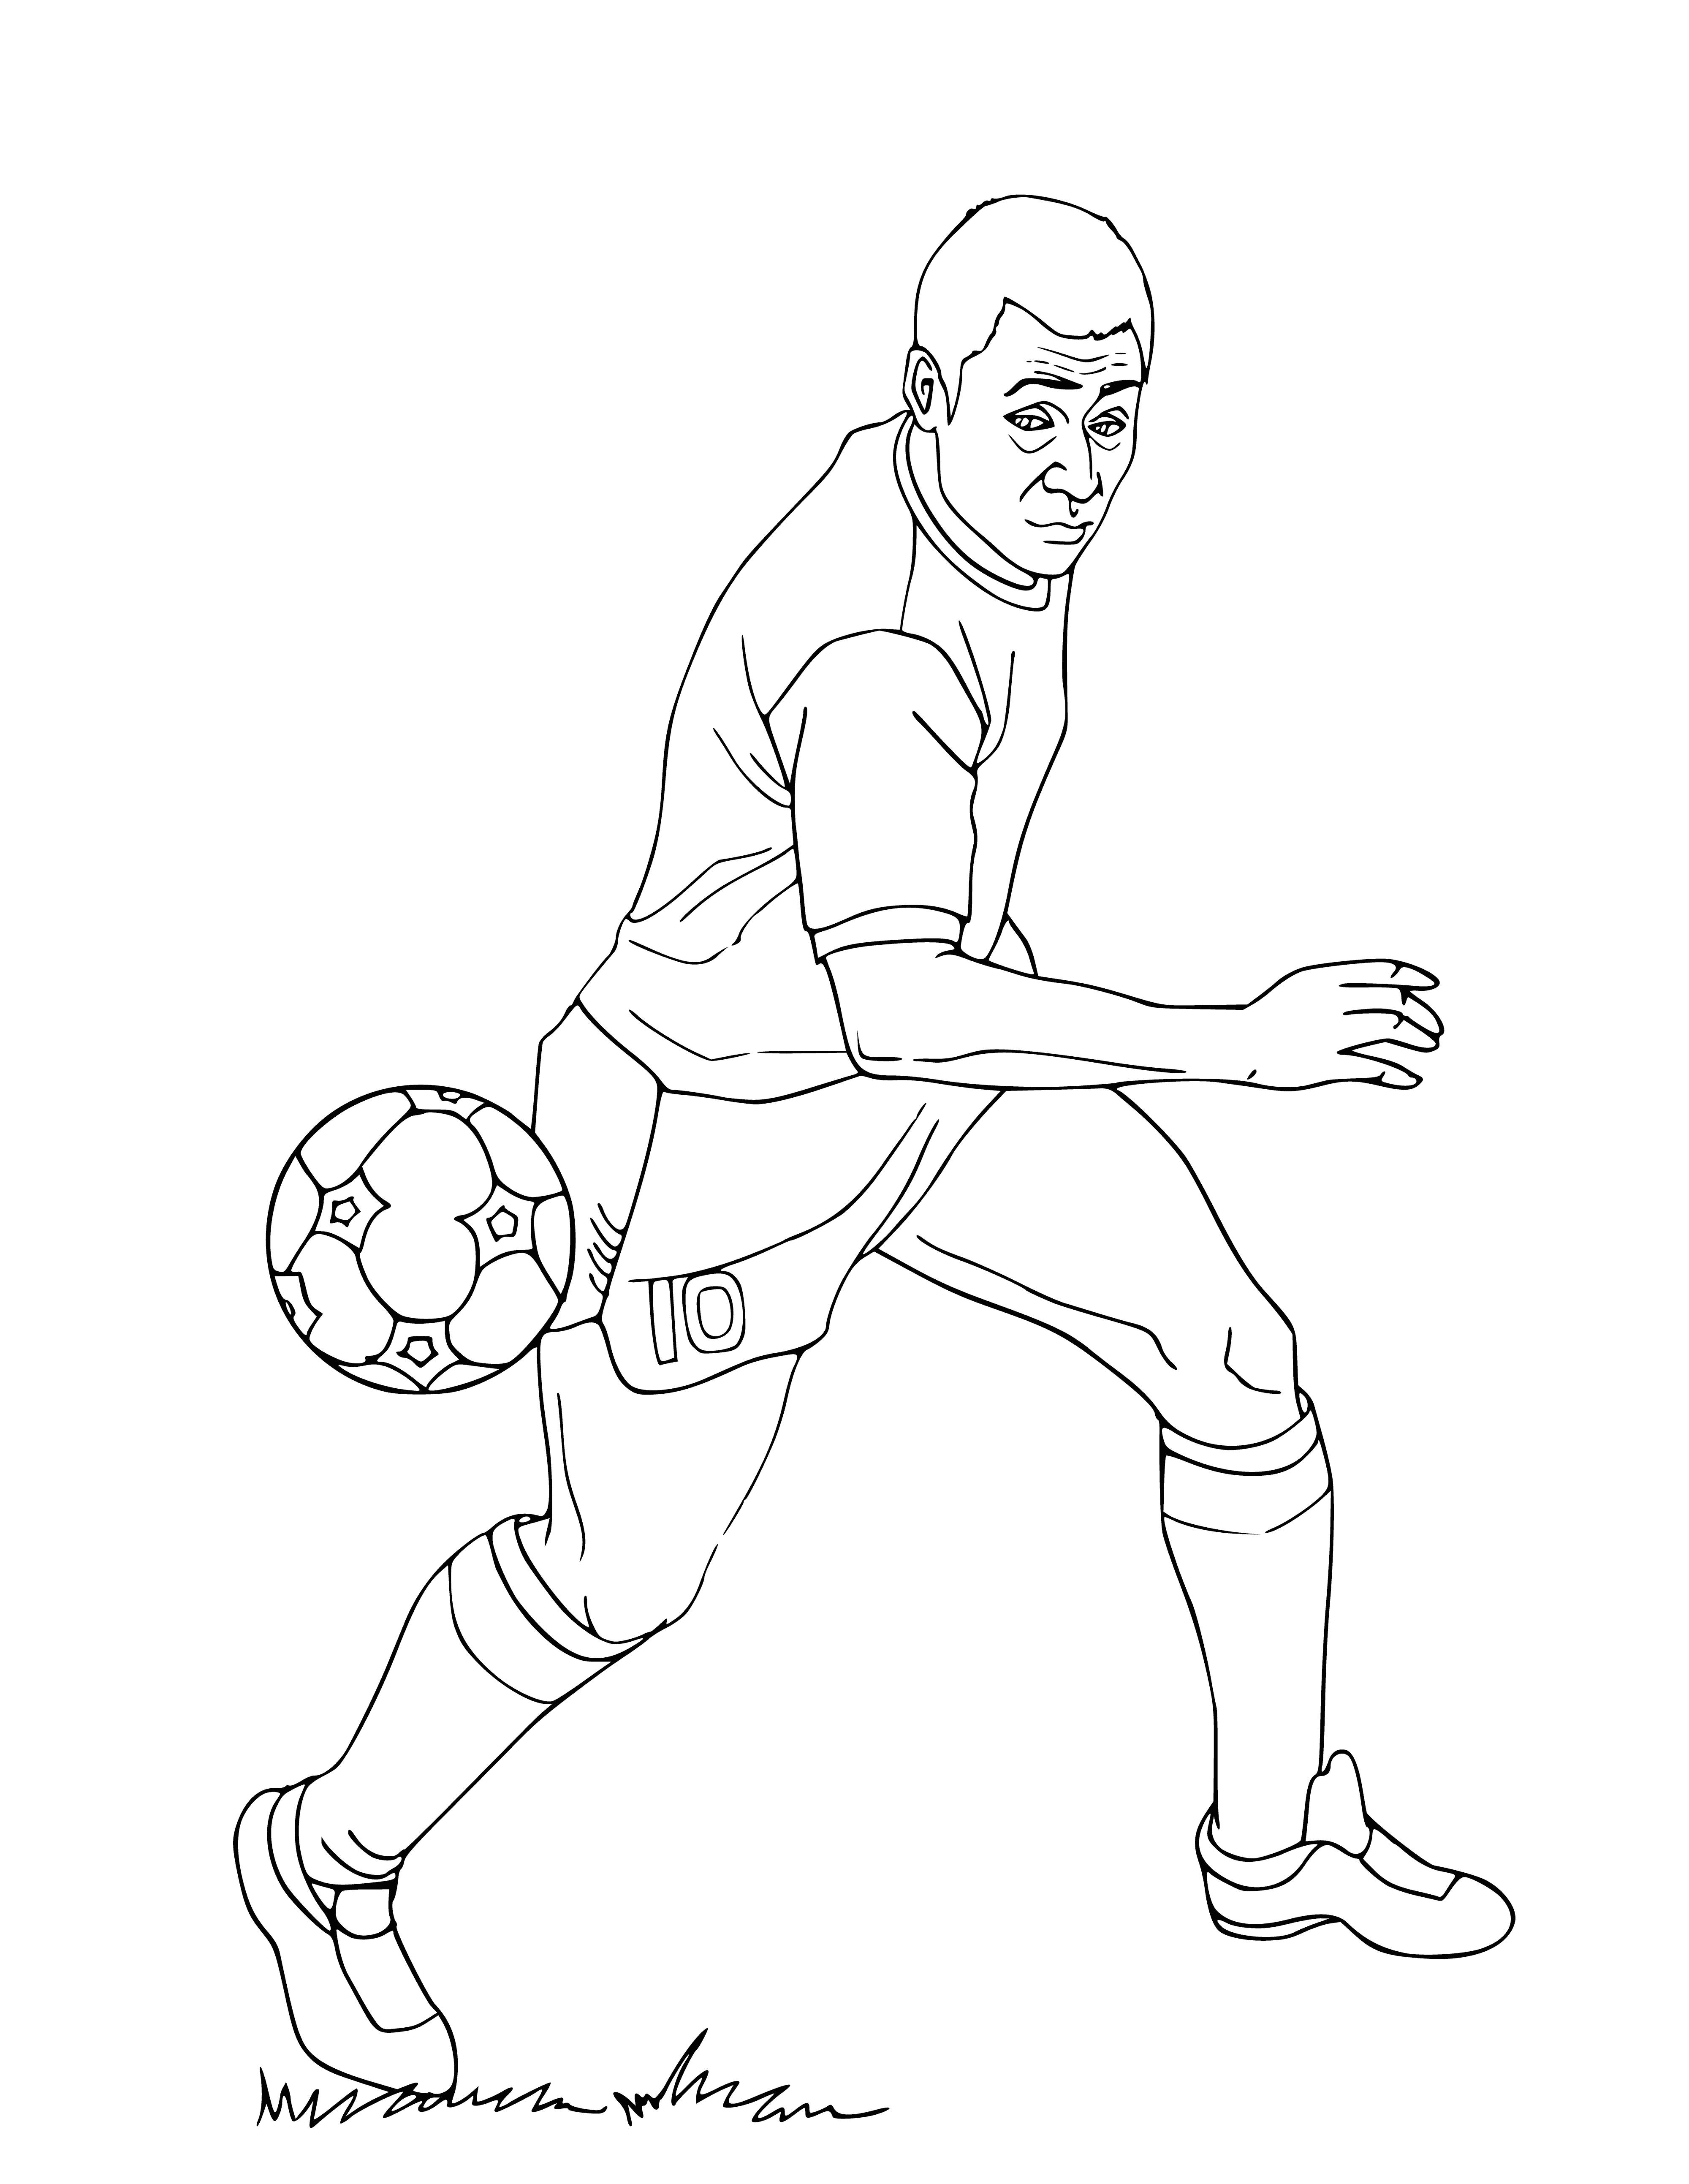 Attractive mbappe coloring book